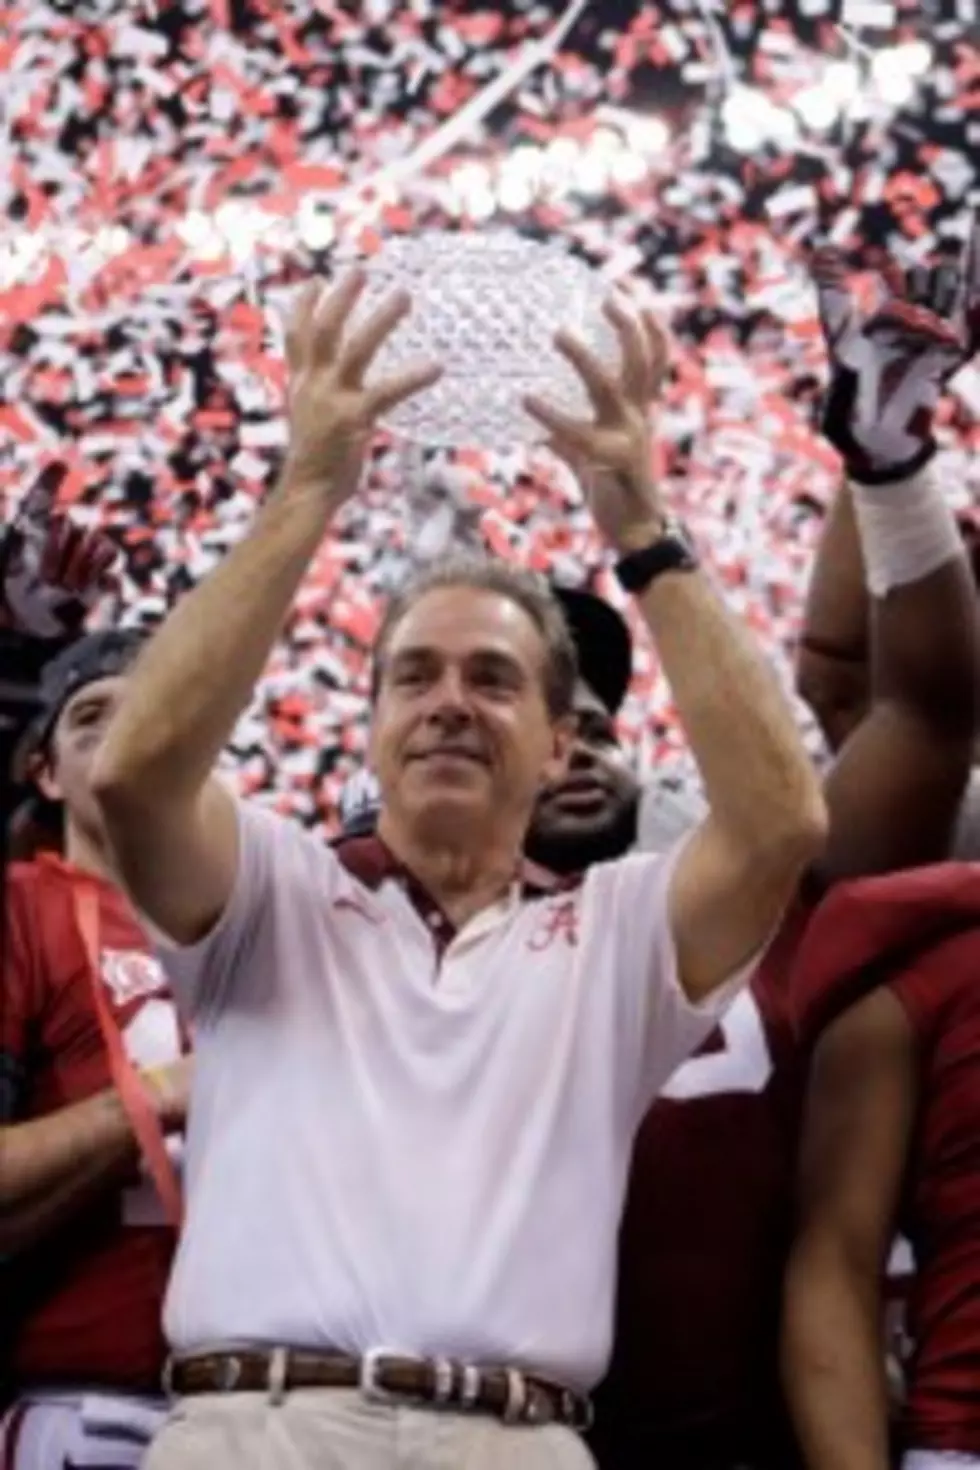 Like it or not, Alabama is the National Champion